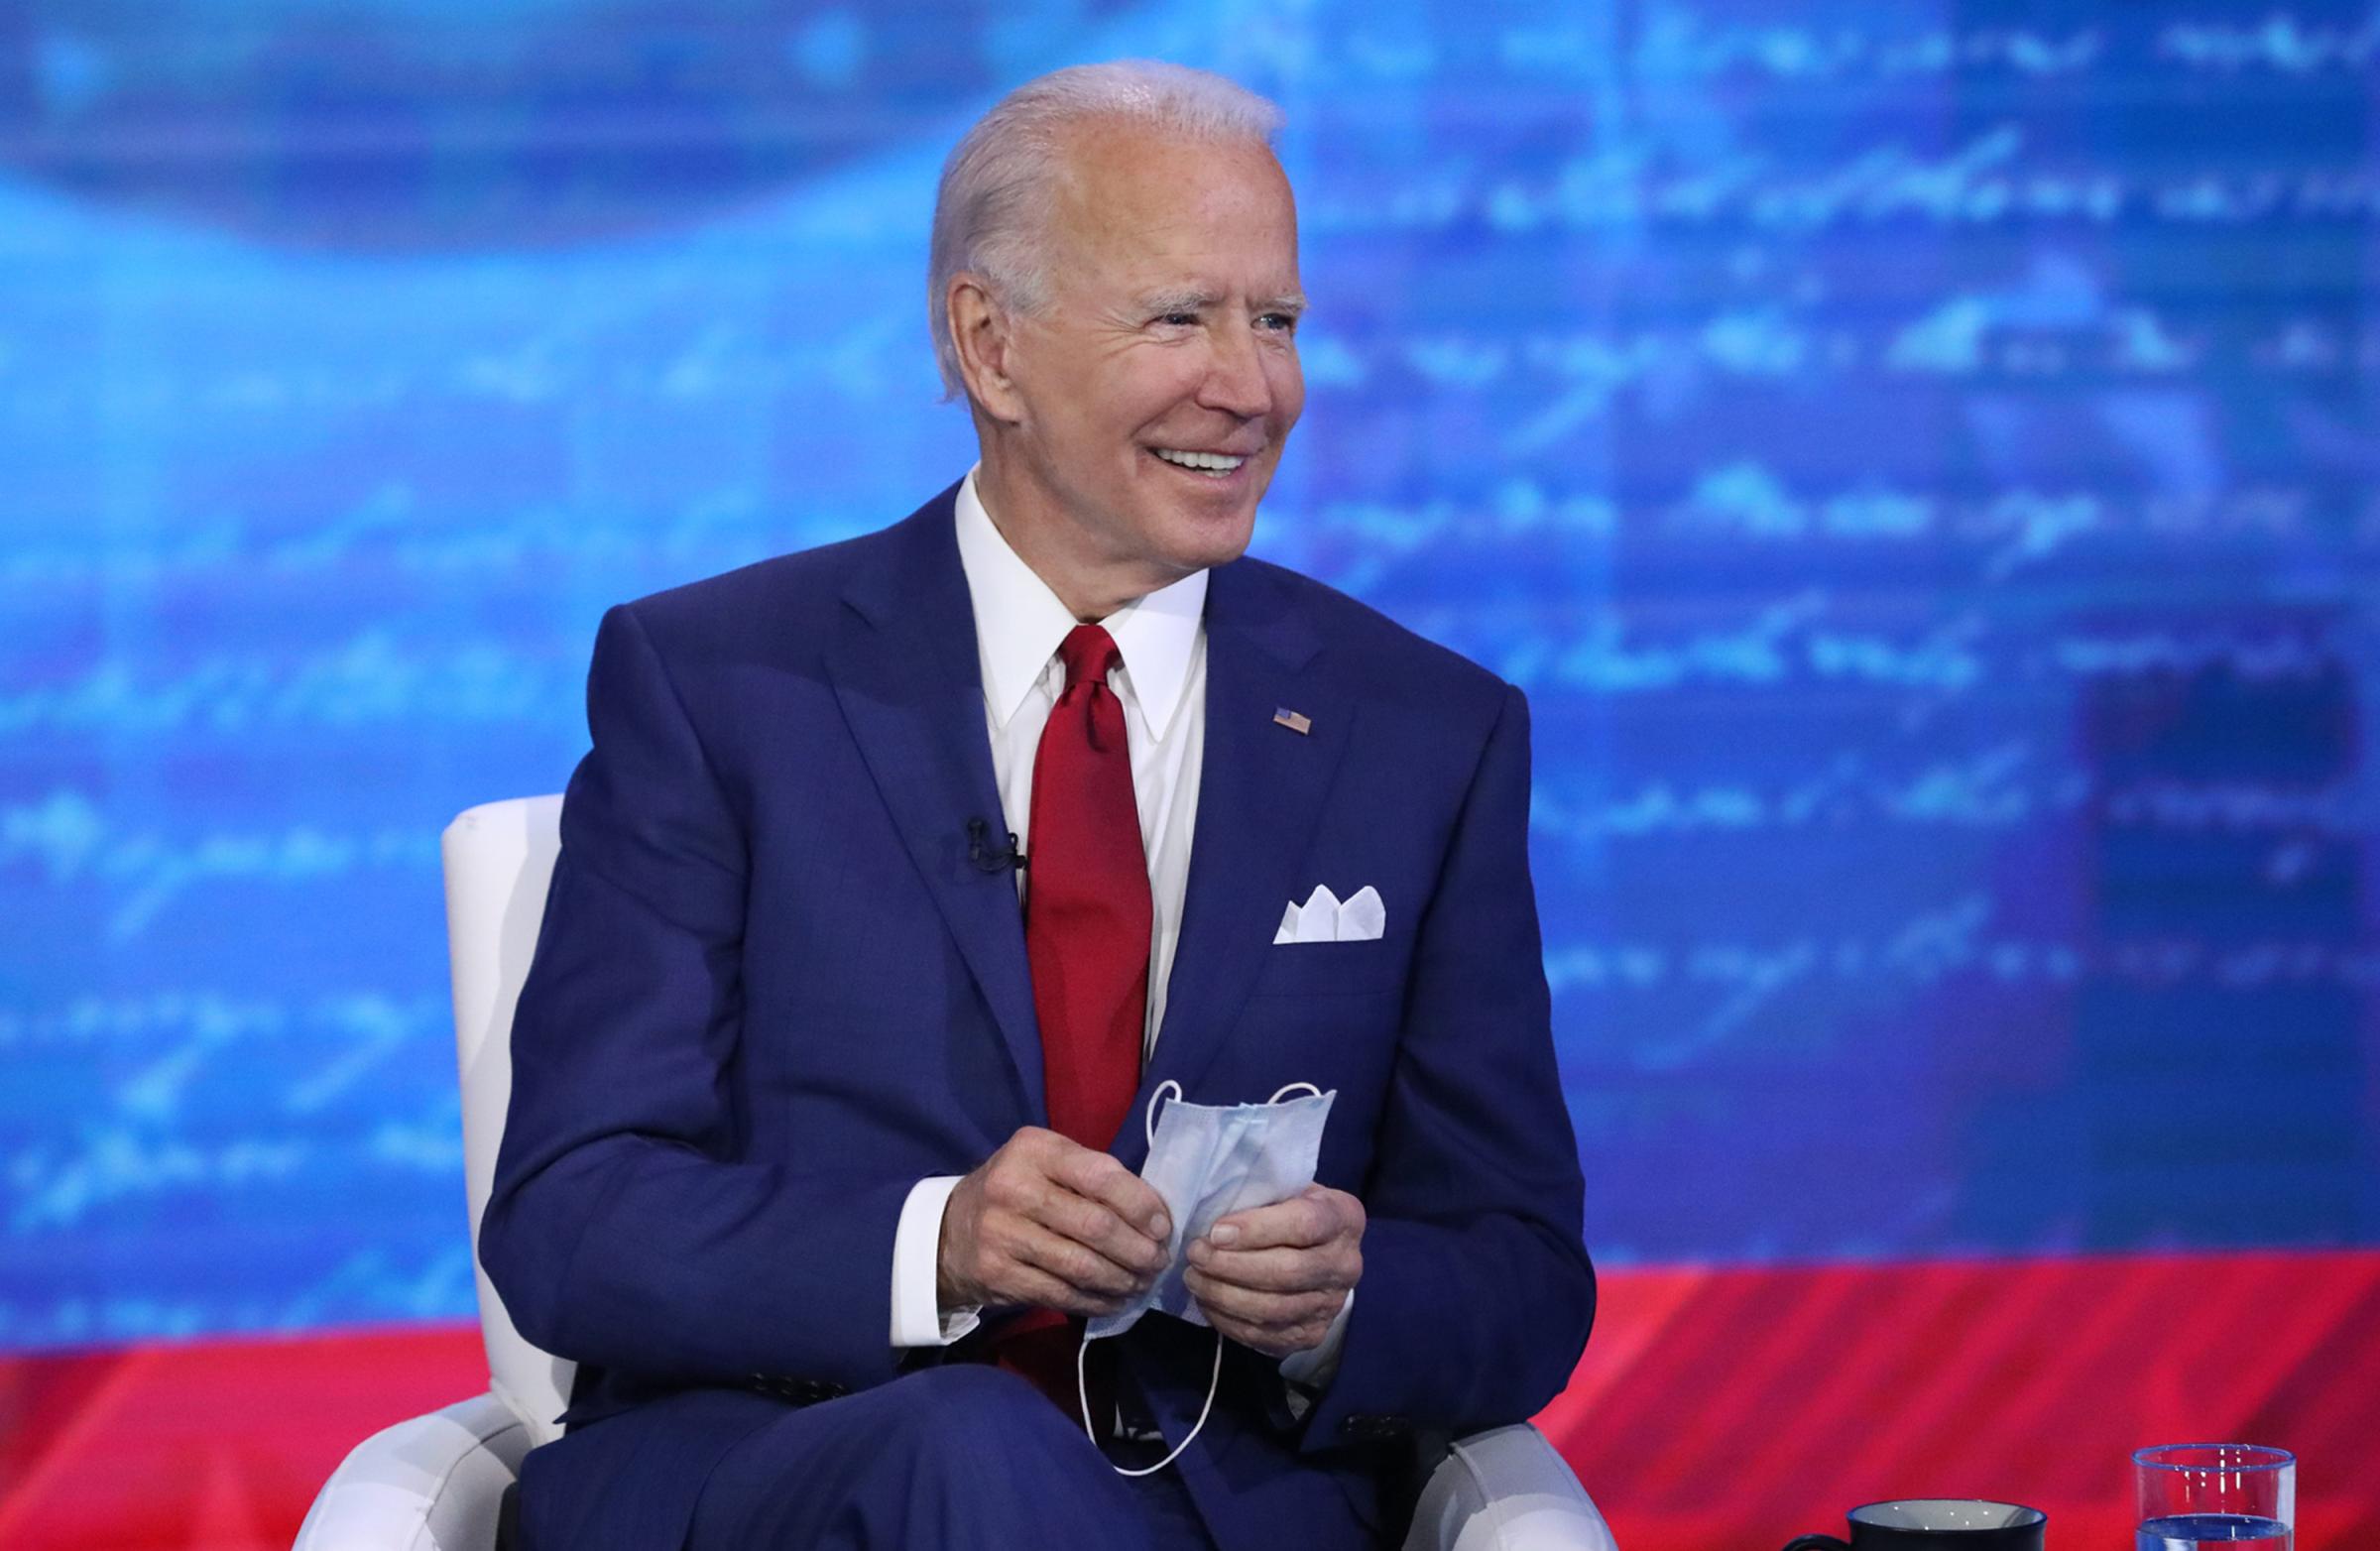 ABC News Presents "The Vice President and the People" Town Hall with Presidential Candidate Joe Biden and George Stephanopoulos